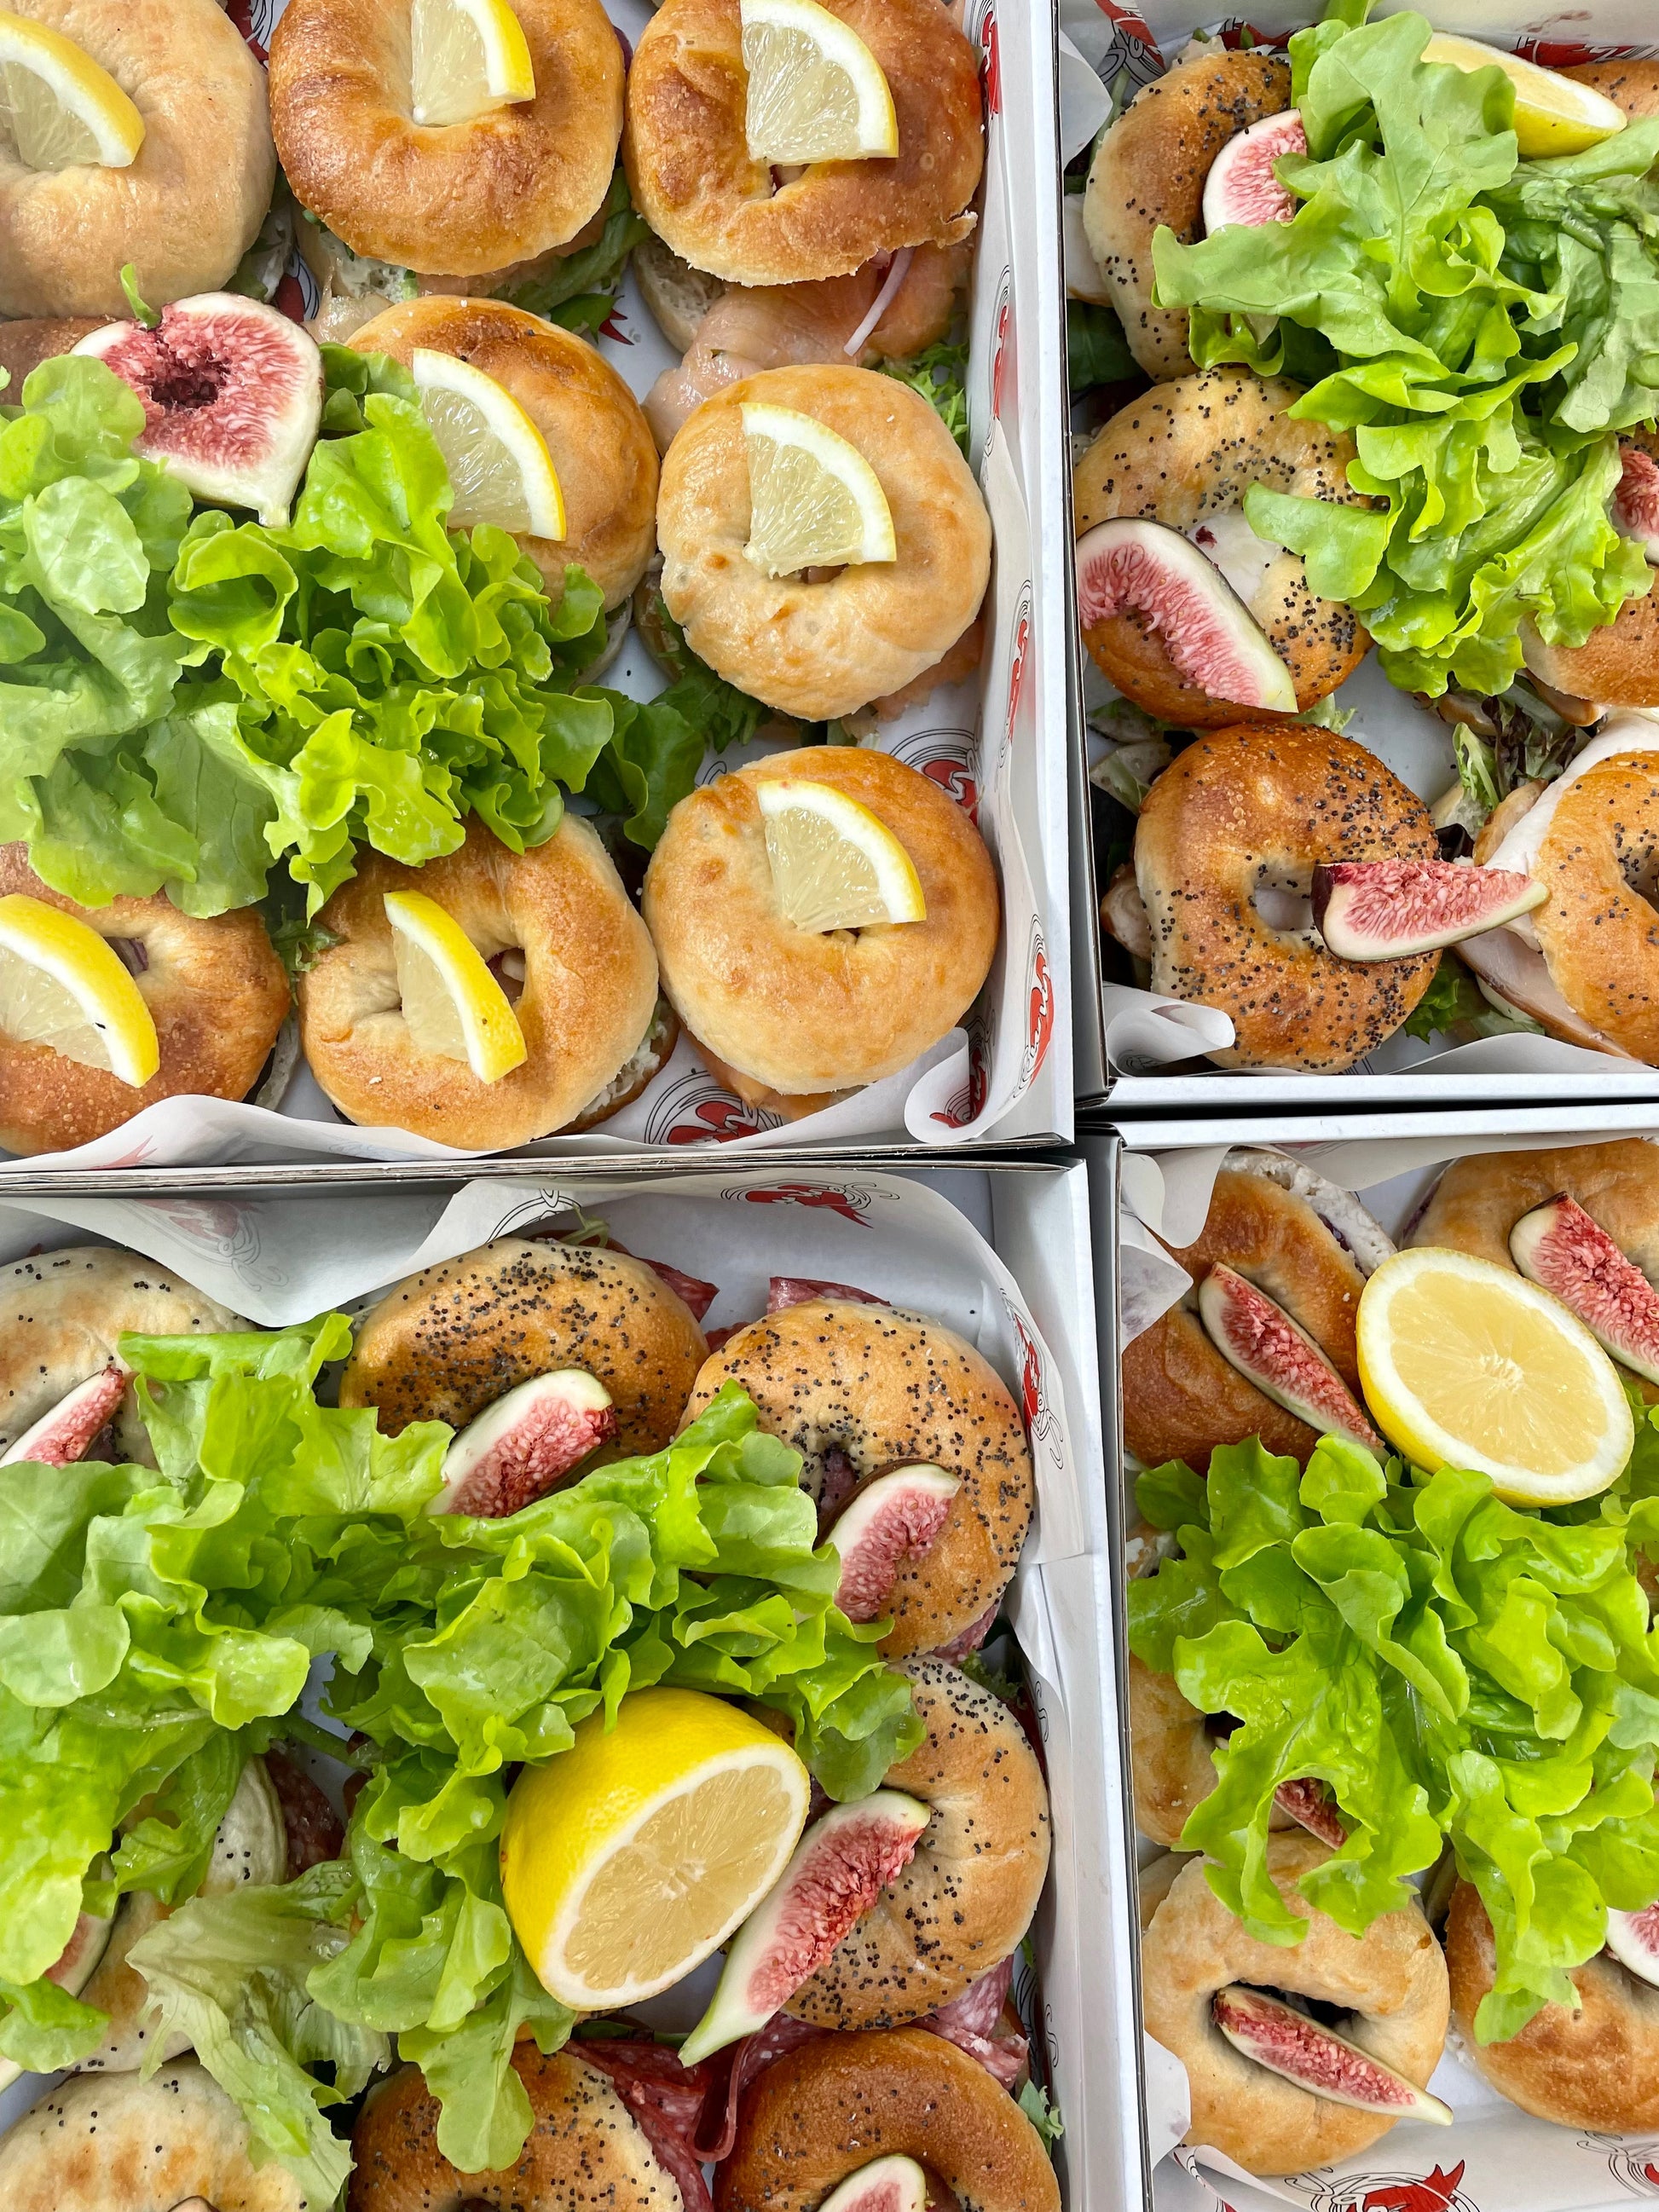 Mini Bagels - Sammys Catering & Co